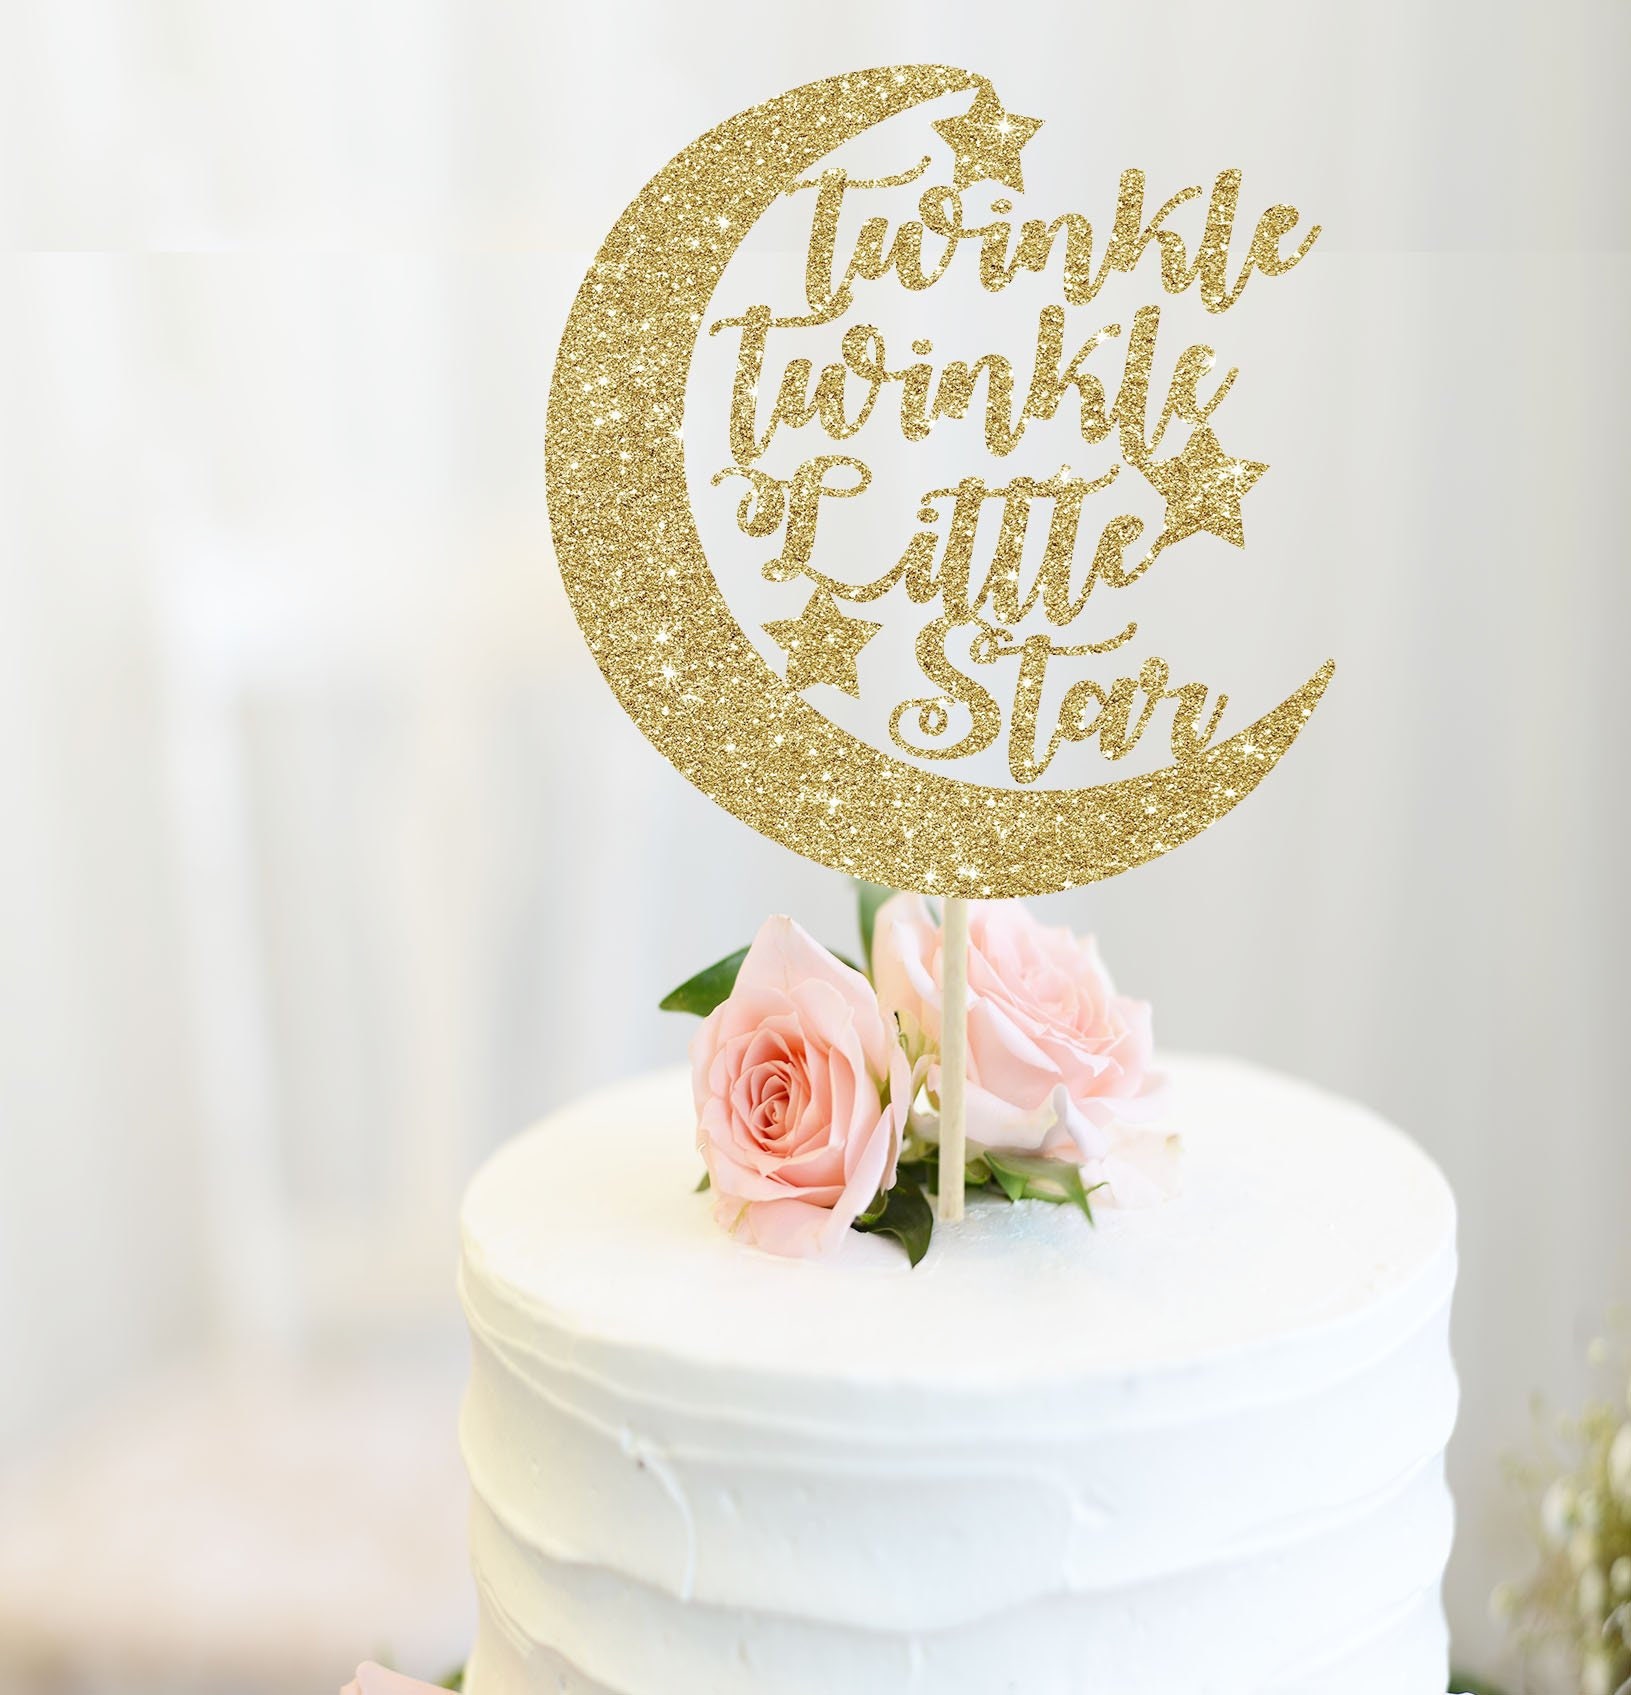 Twinkle Twinkle Little Star For Baby Shower | lupon.gov.ph